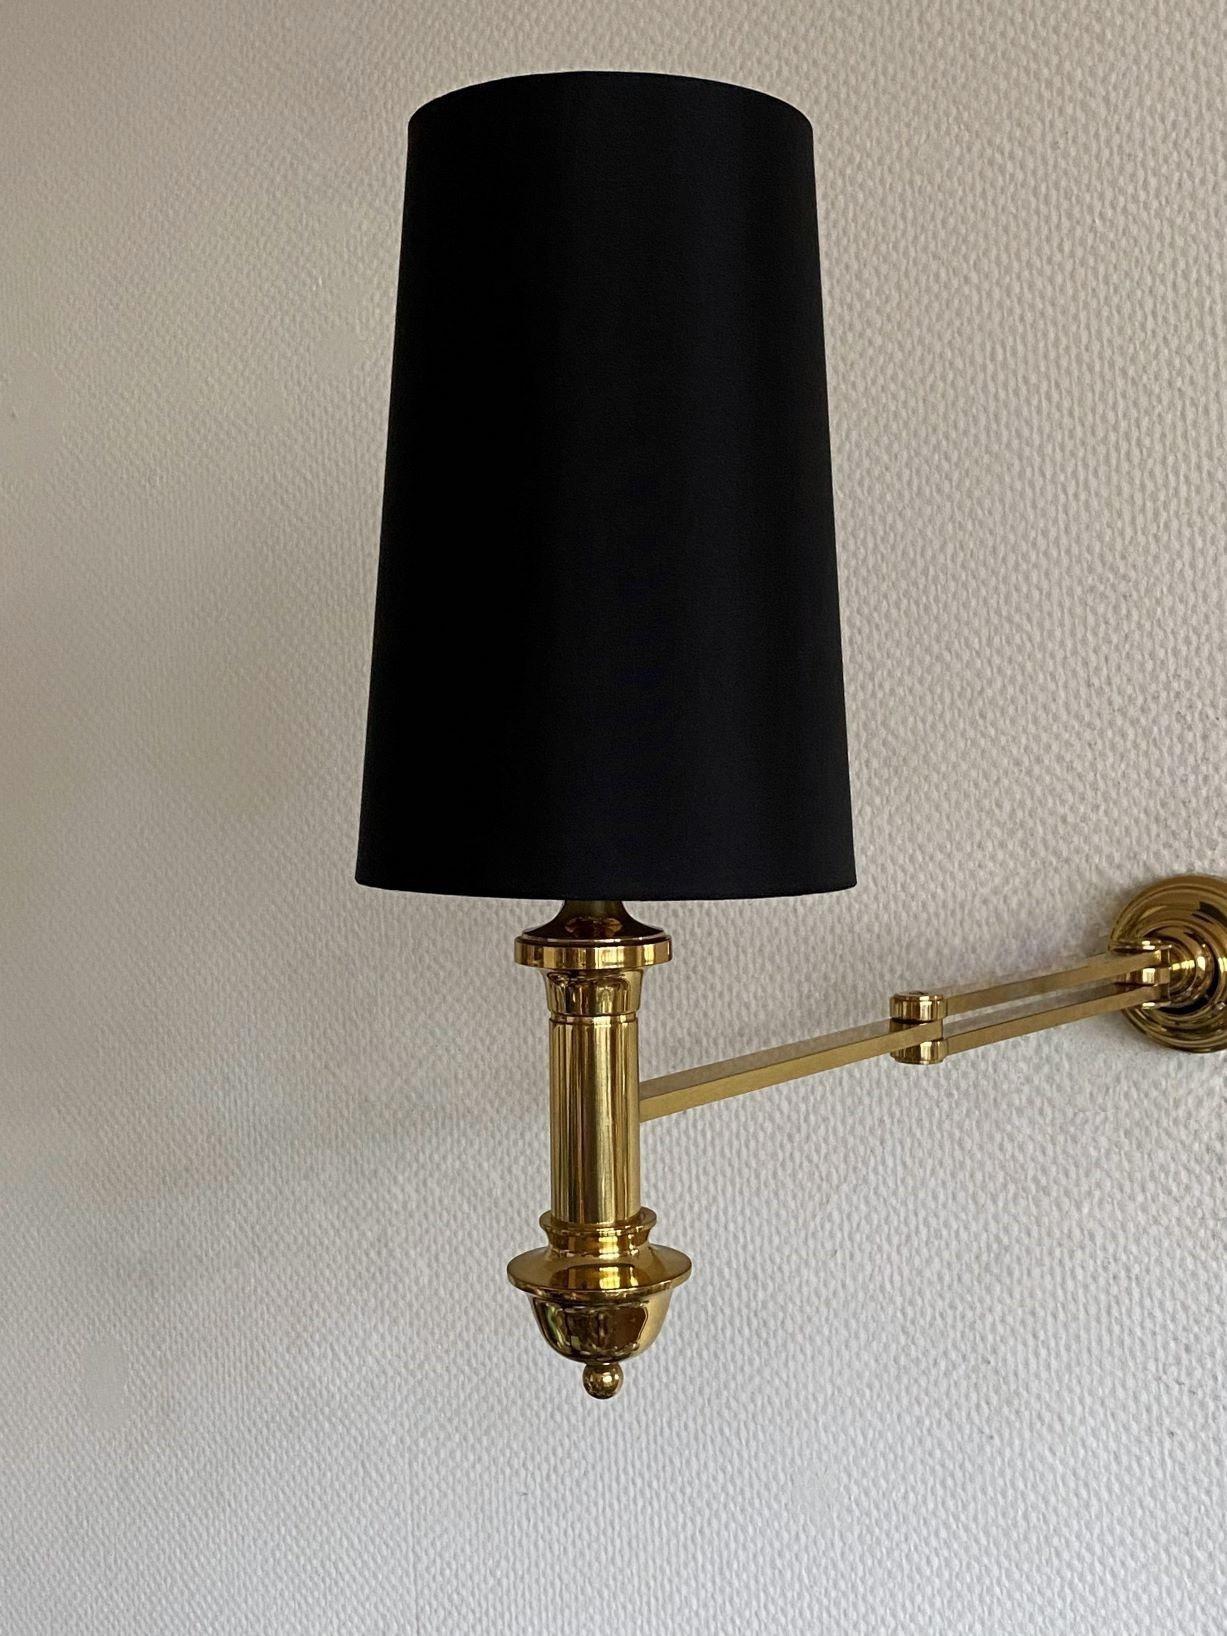 Pair of Brass Swing Arm Wall Lights, 1960s For Sale 8